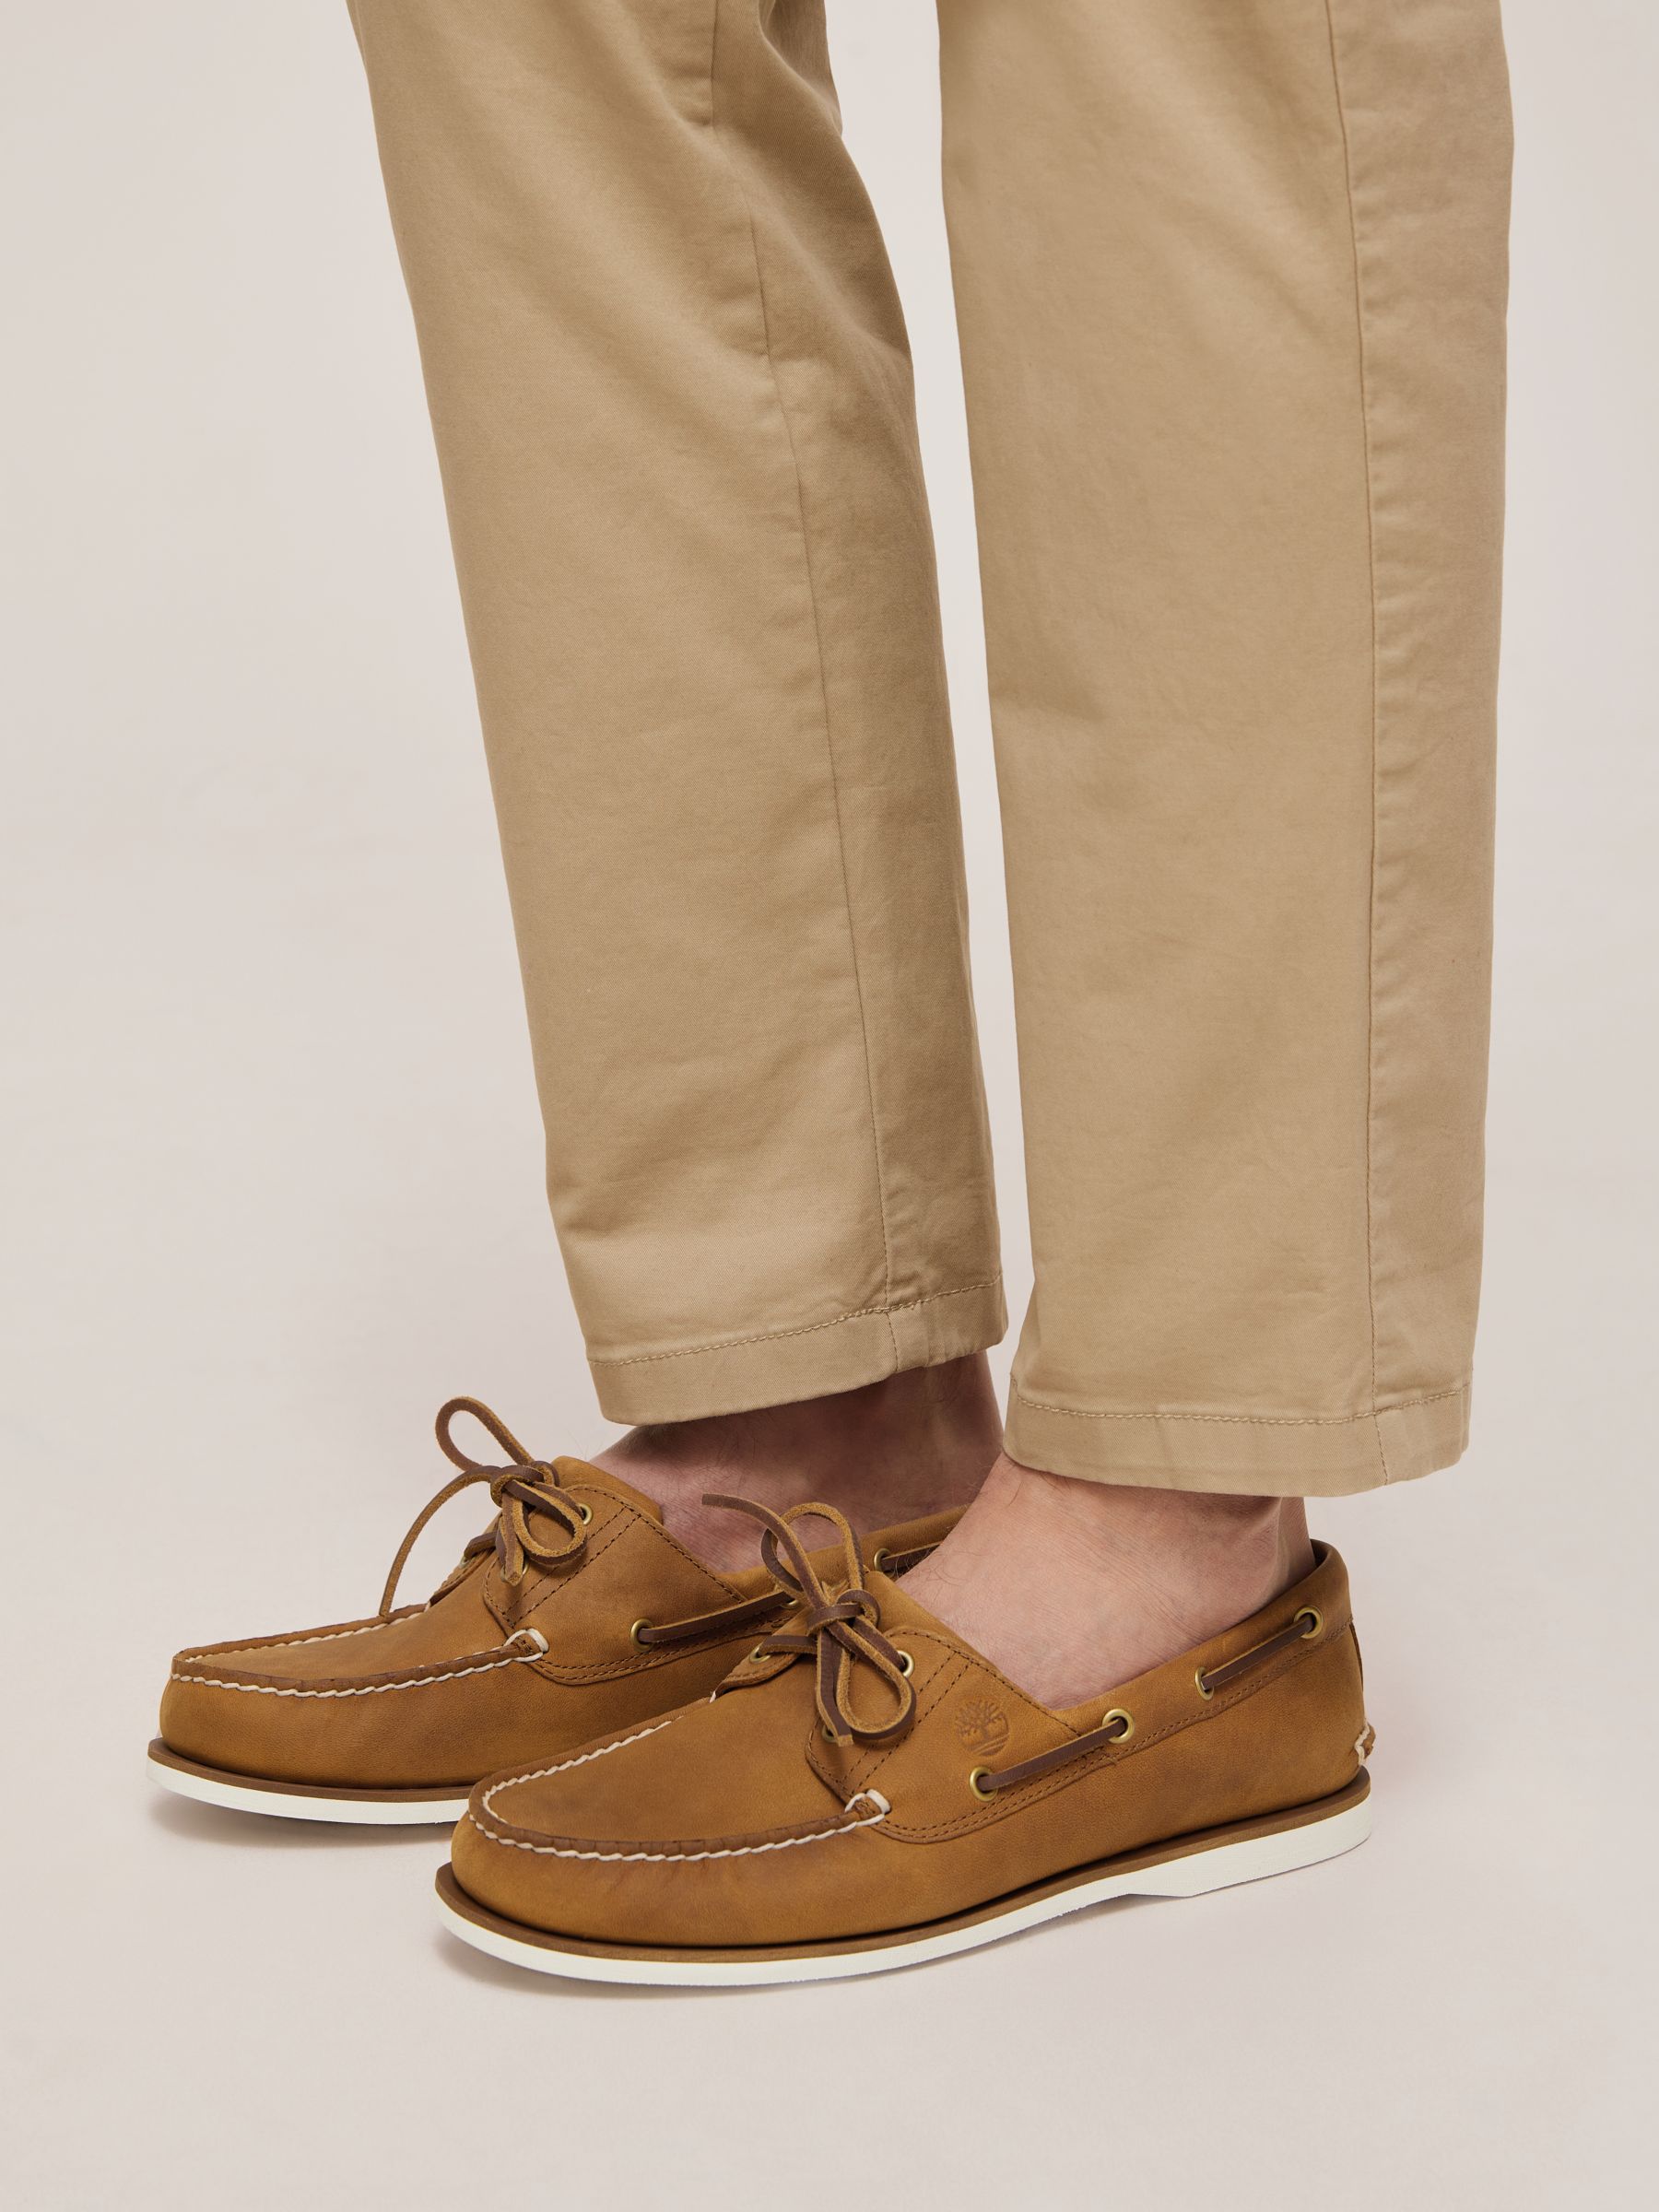 Timberland Classic 2 Eye Leather Boat Shoes, at John & Partners